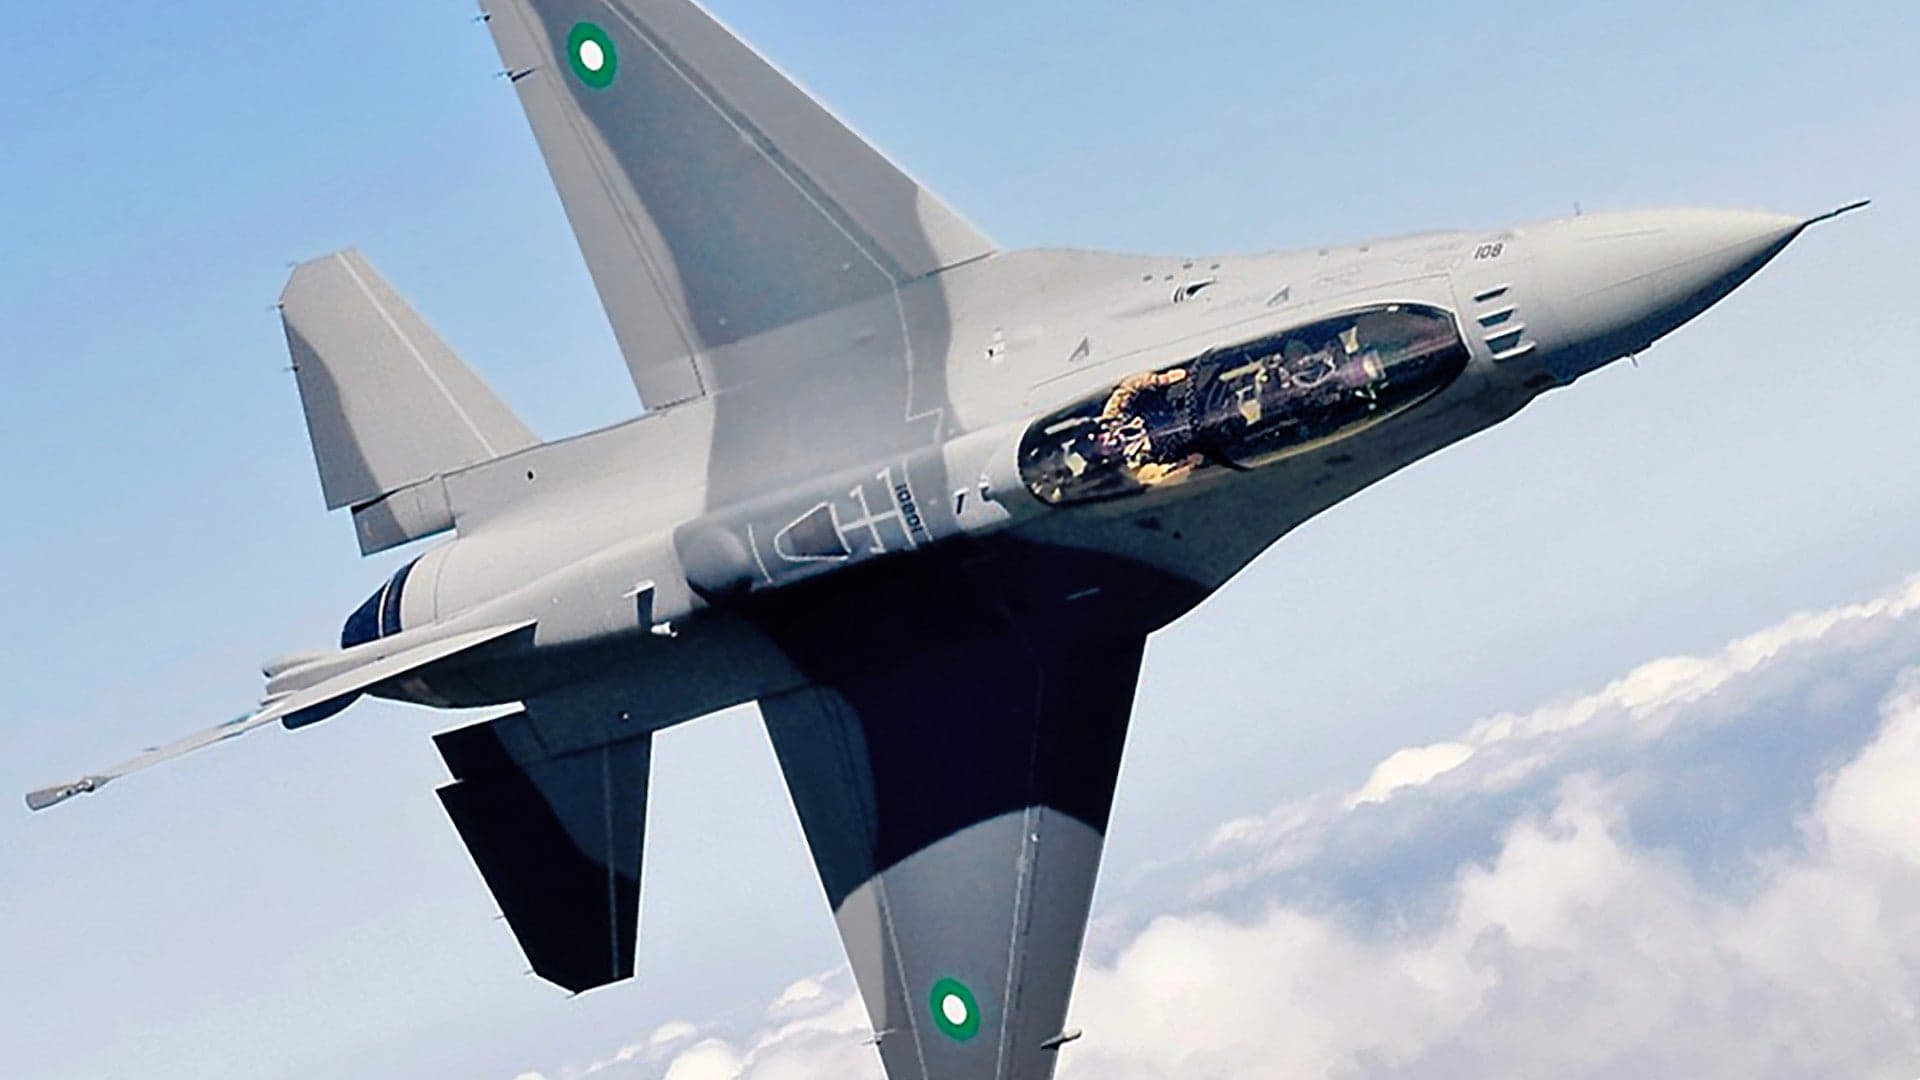 Indian Radar Data That Supposedly Proves They Downed An F-16 Is Far From “Irrefutable”